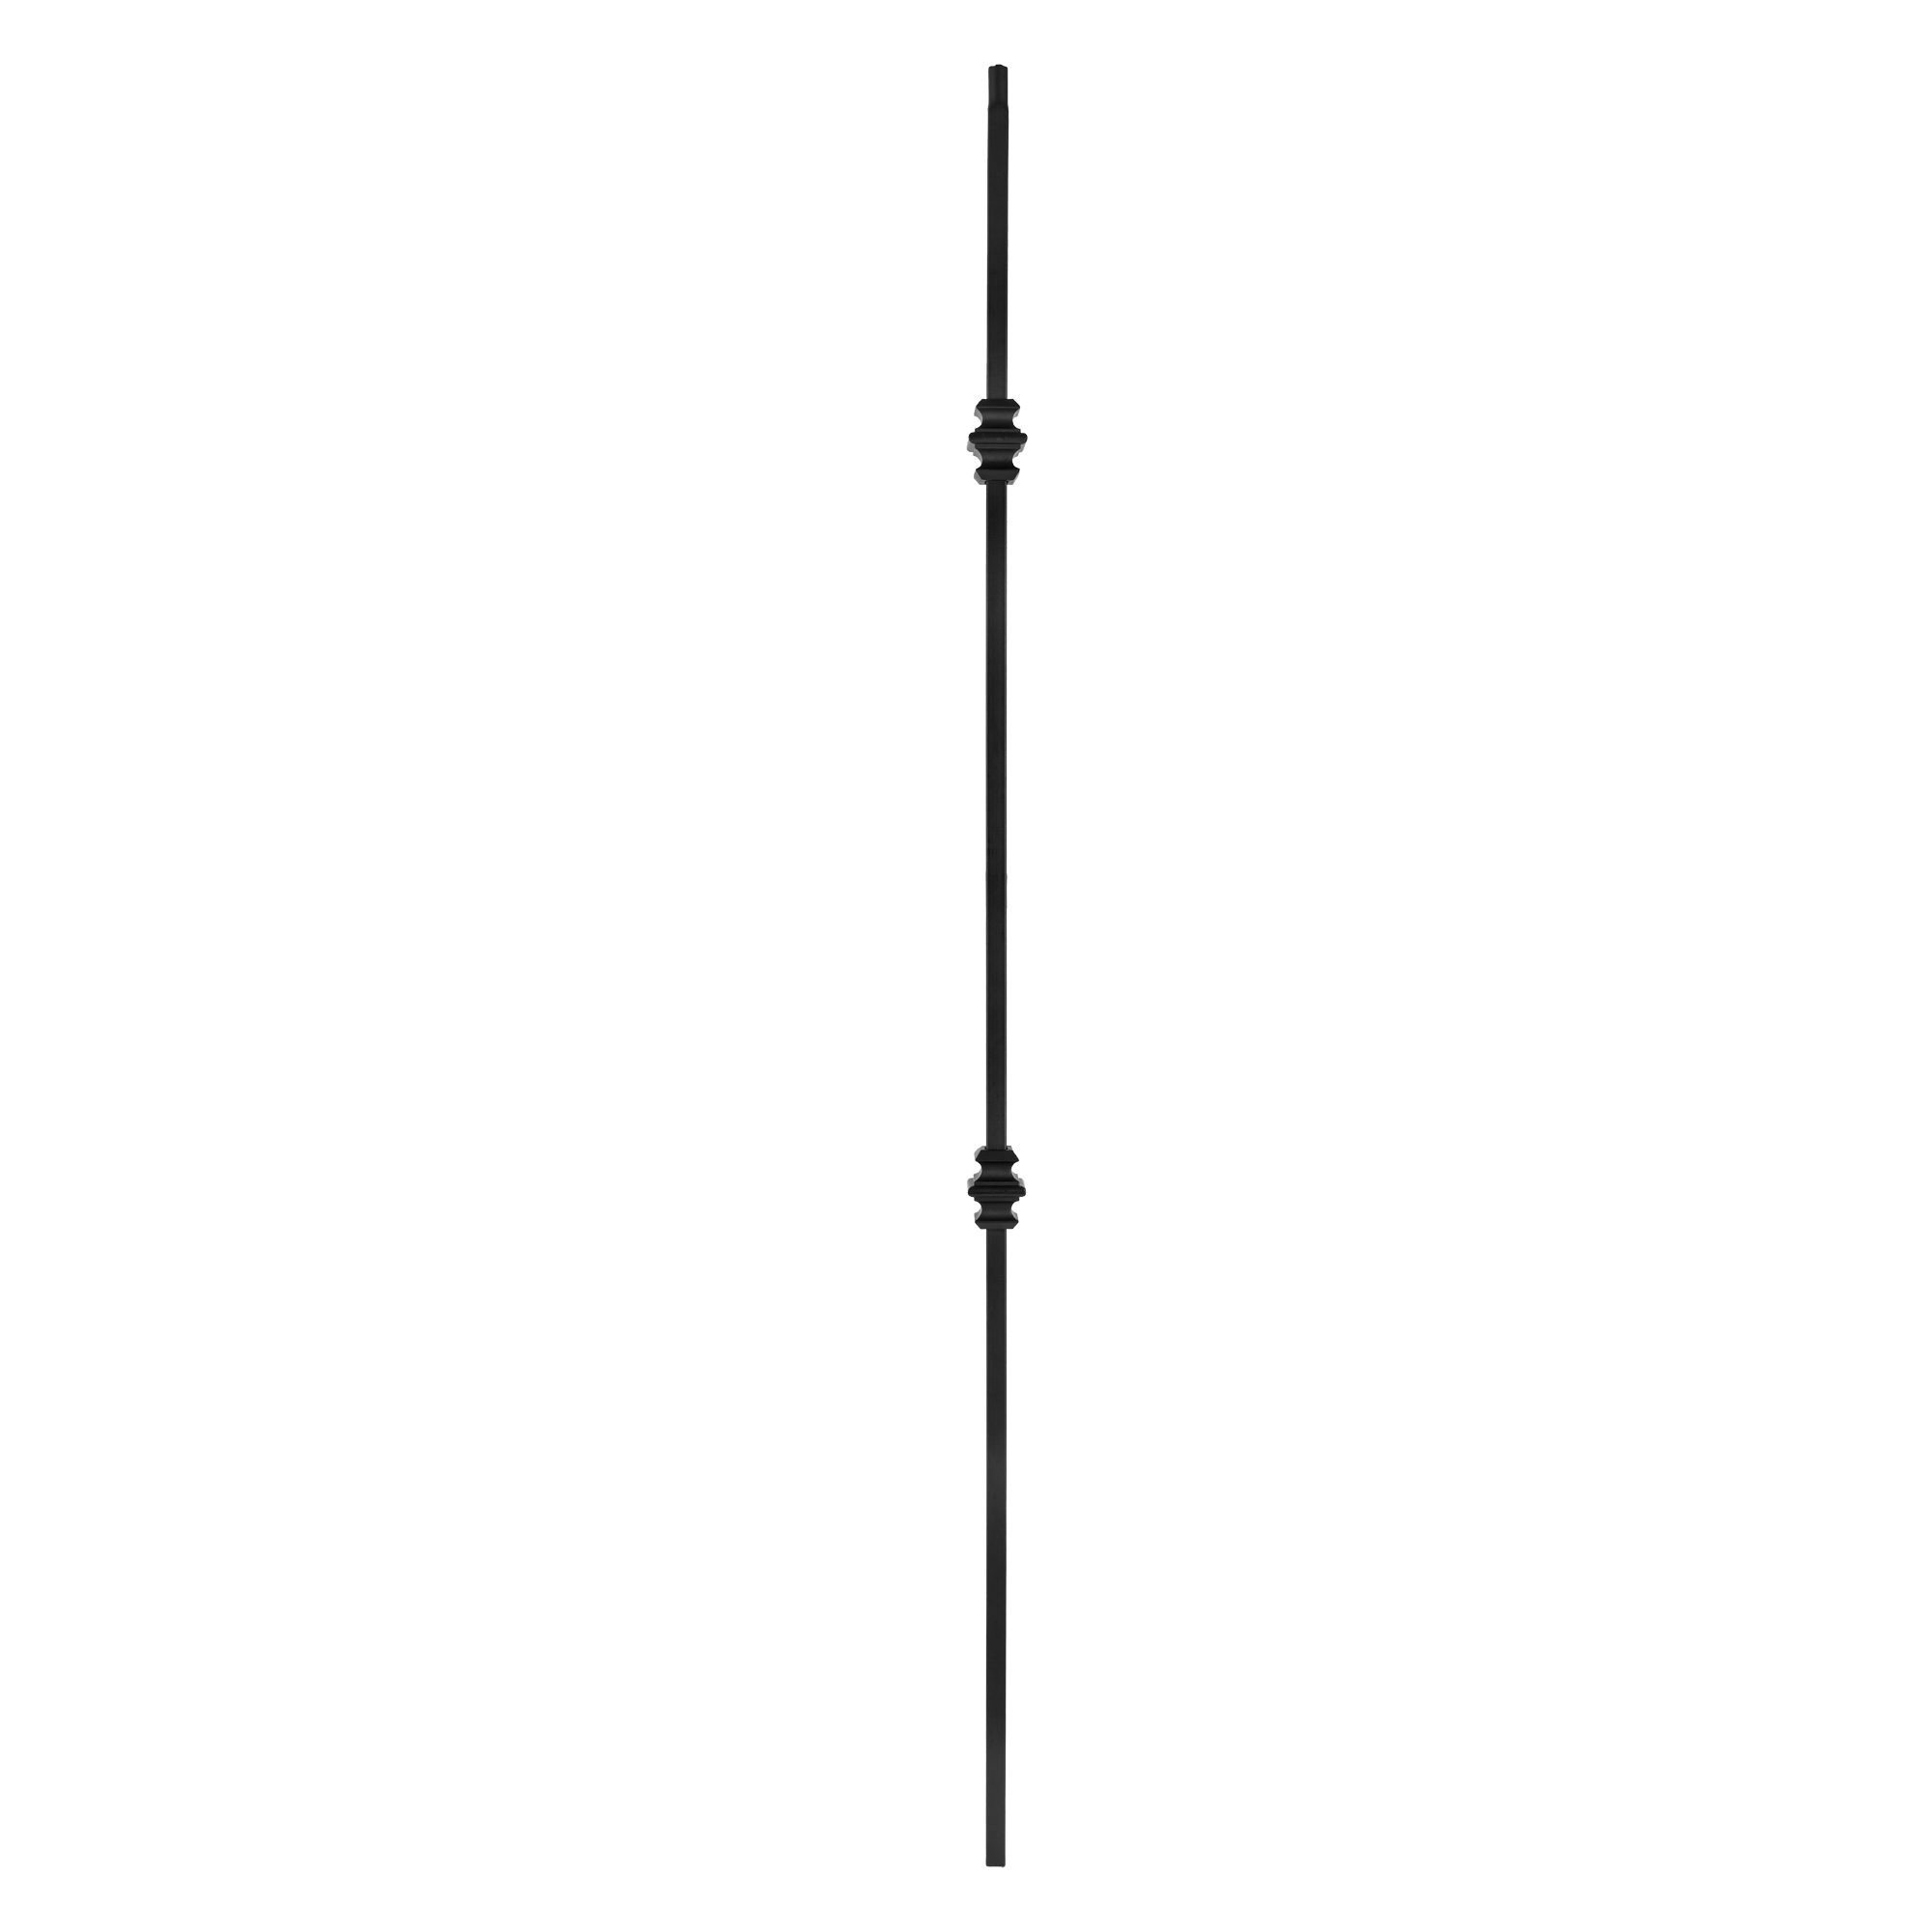 SQI2C Double Collar Stair Baluster, 44 in H, 1/2 in W, Square, Steel, Black, Powder-Coated/Semi-Matte